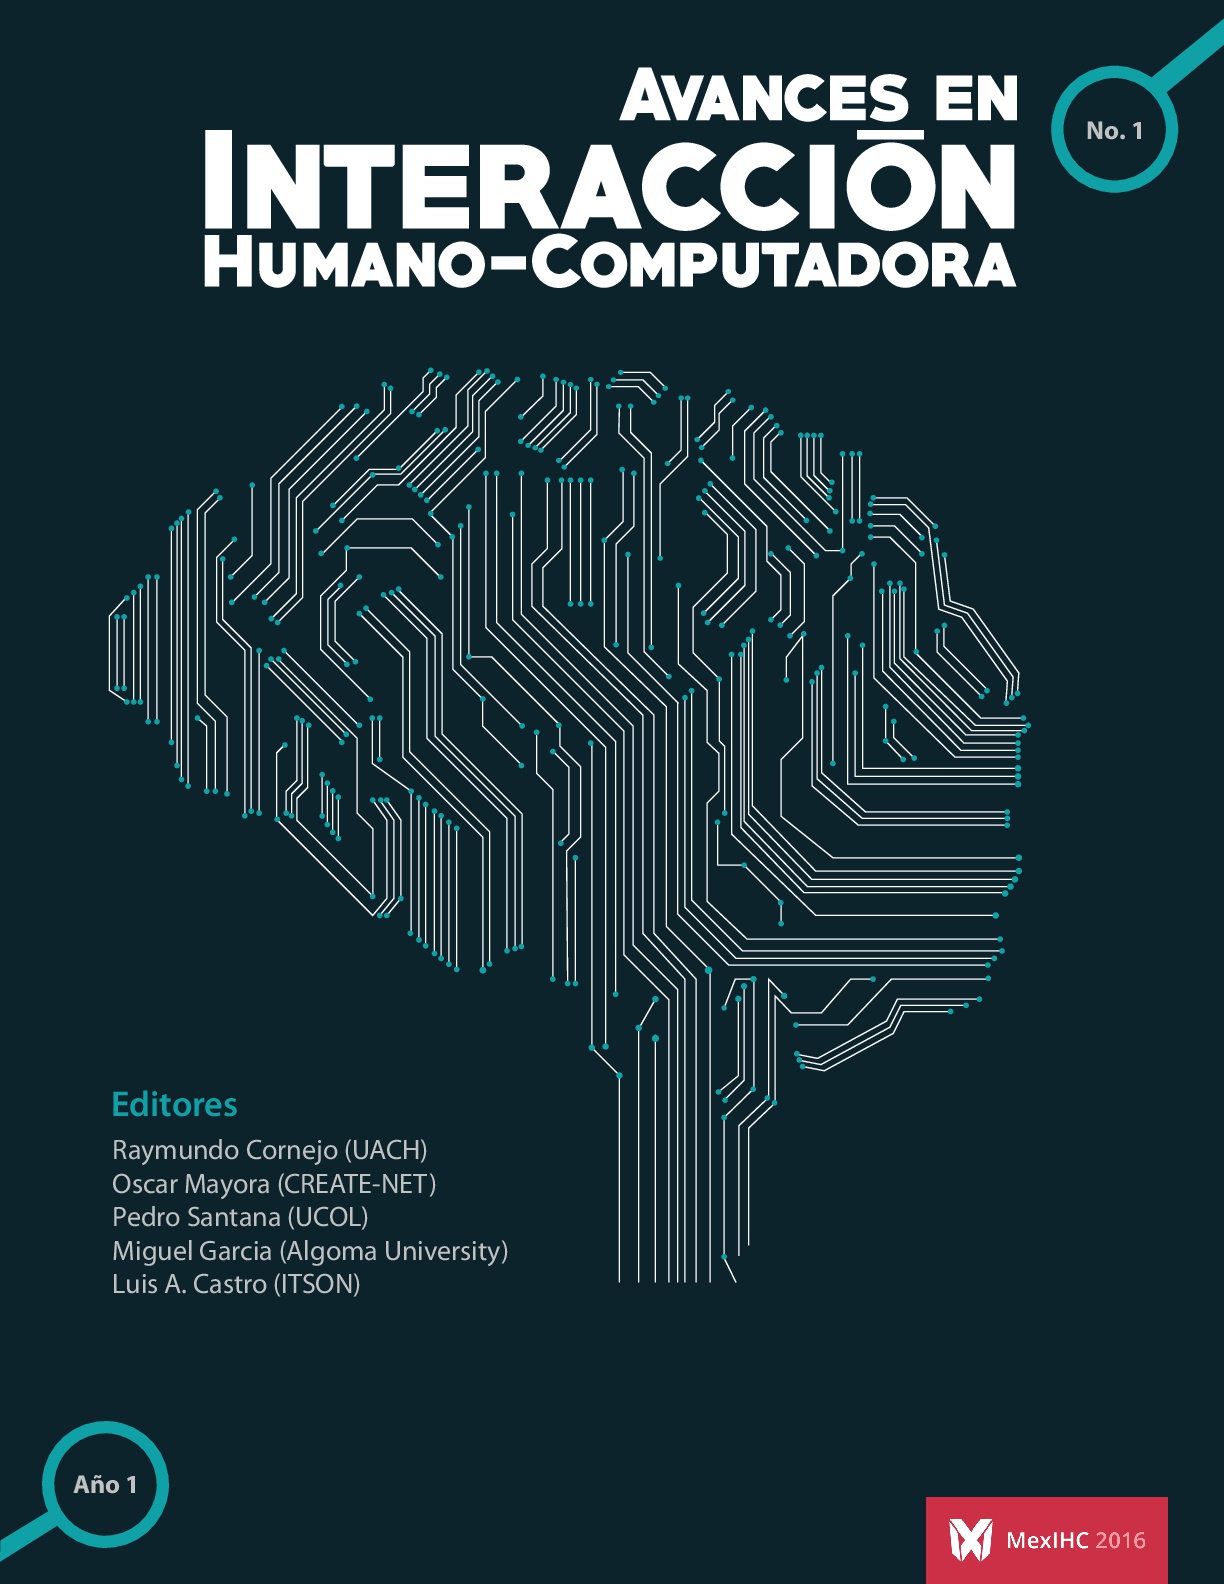 This is the cover of the Journal Avances en Interacción Humano-Computadora. On the cover, you will find a machine-like human brain